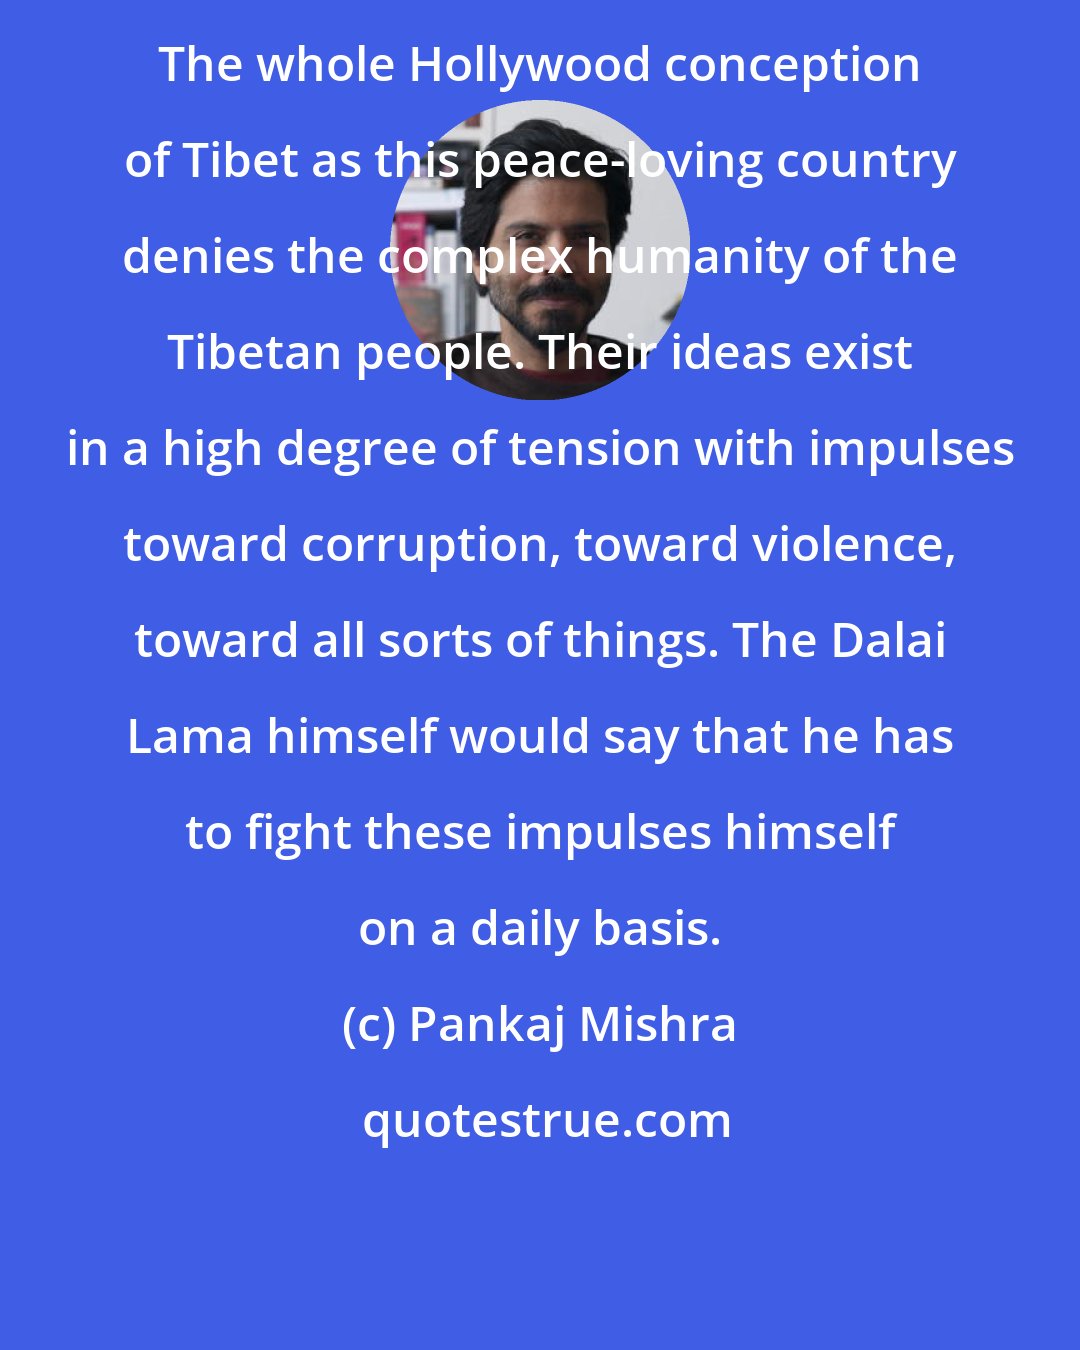 Pankaj Mishra: The whole Hollywood conception of Tibet as this peace-loving country denies the complex humanity of the Tibetan people. Their ideas exist in a high degree of tension with impulses toward corruption, toward violence, toward all sorts of things. The Dalai Lama himself would say that he has to fight these impulses himself on a daily basis.